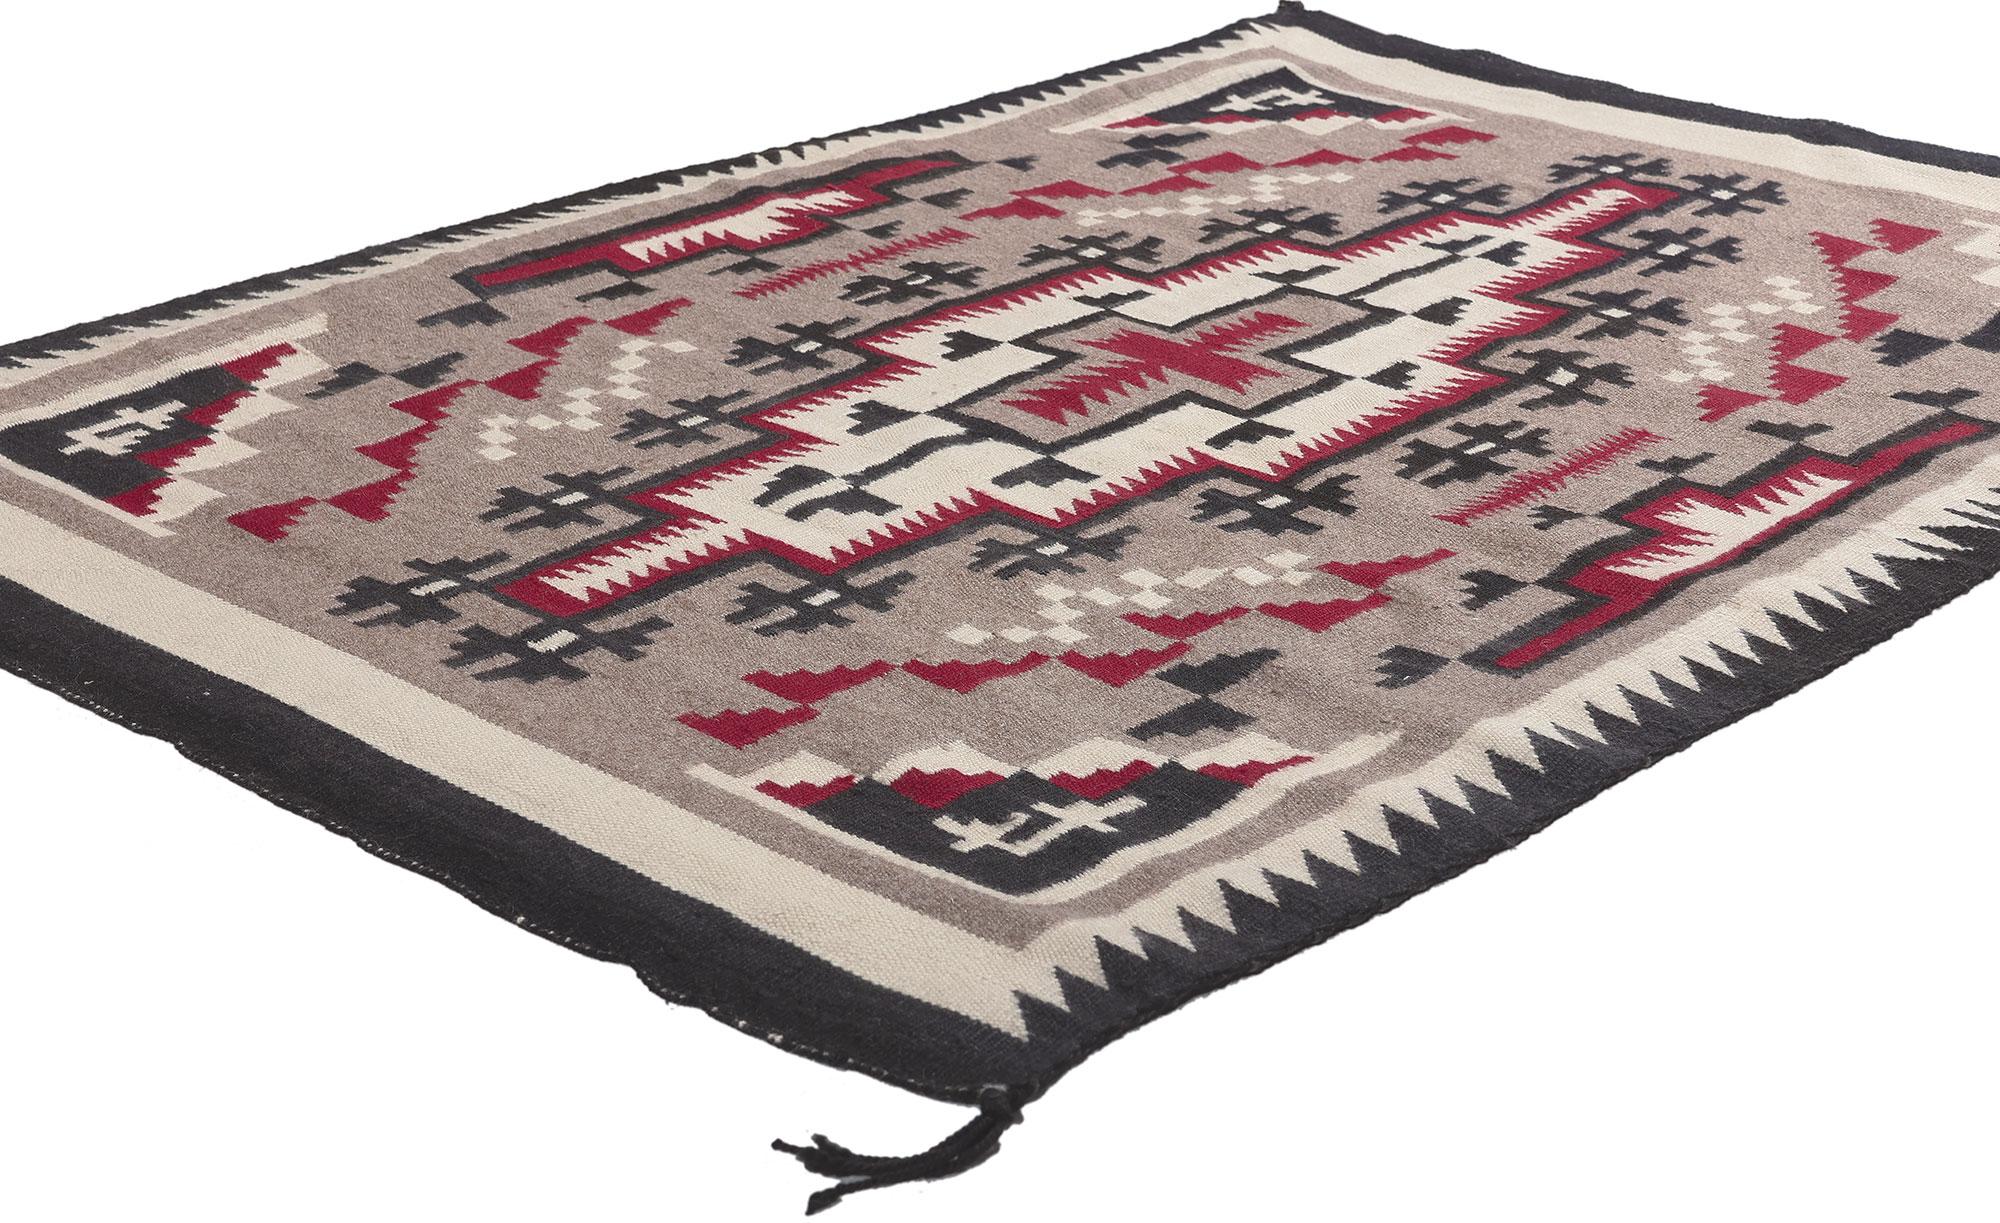 78612 Antique Klagetoh Navajo Rug, 03'01 x 04'05.
Emanating desert style design with incredible detail and texture, this handwoven Klagetoh Navajo rug is a captivating vision of woven beauty. The Native American Klagetoh pattern and earthy colorway